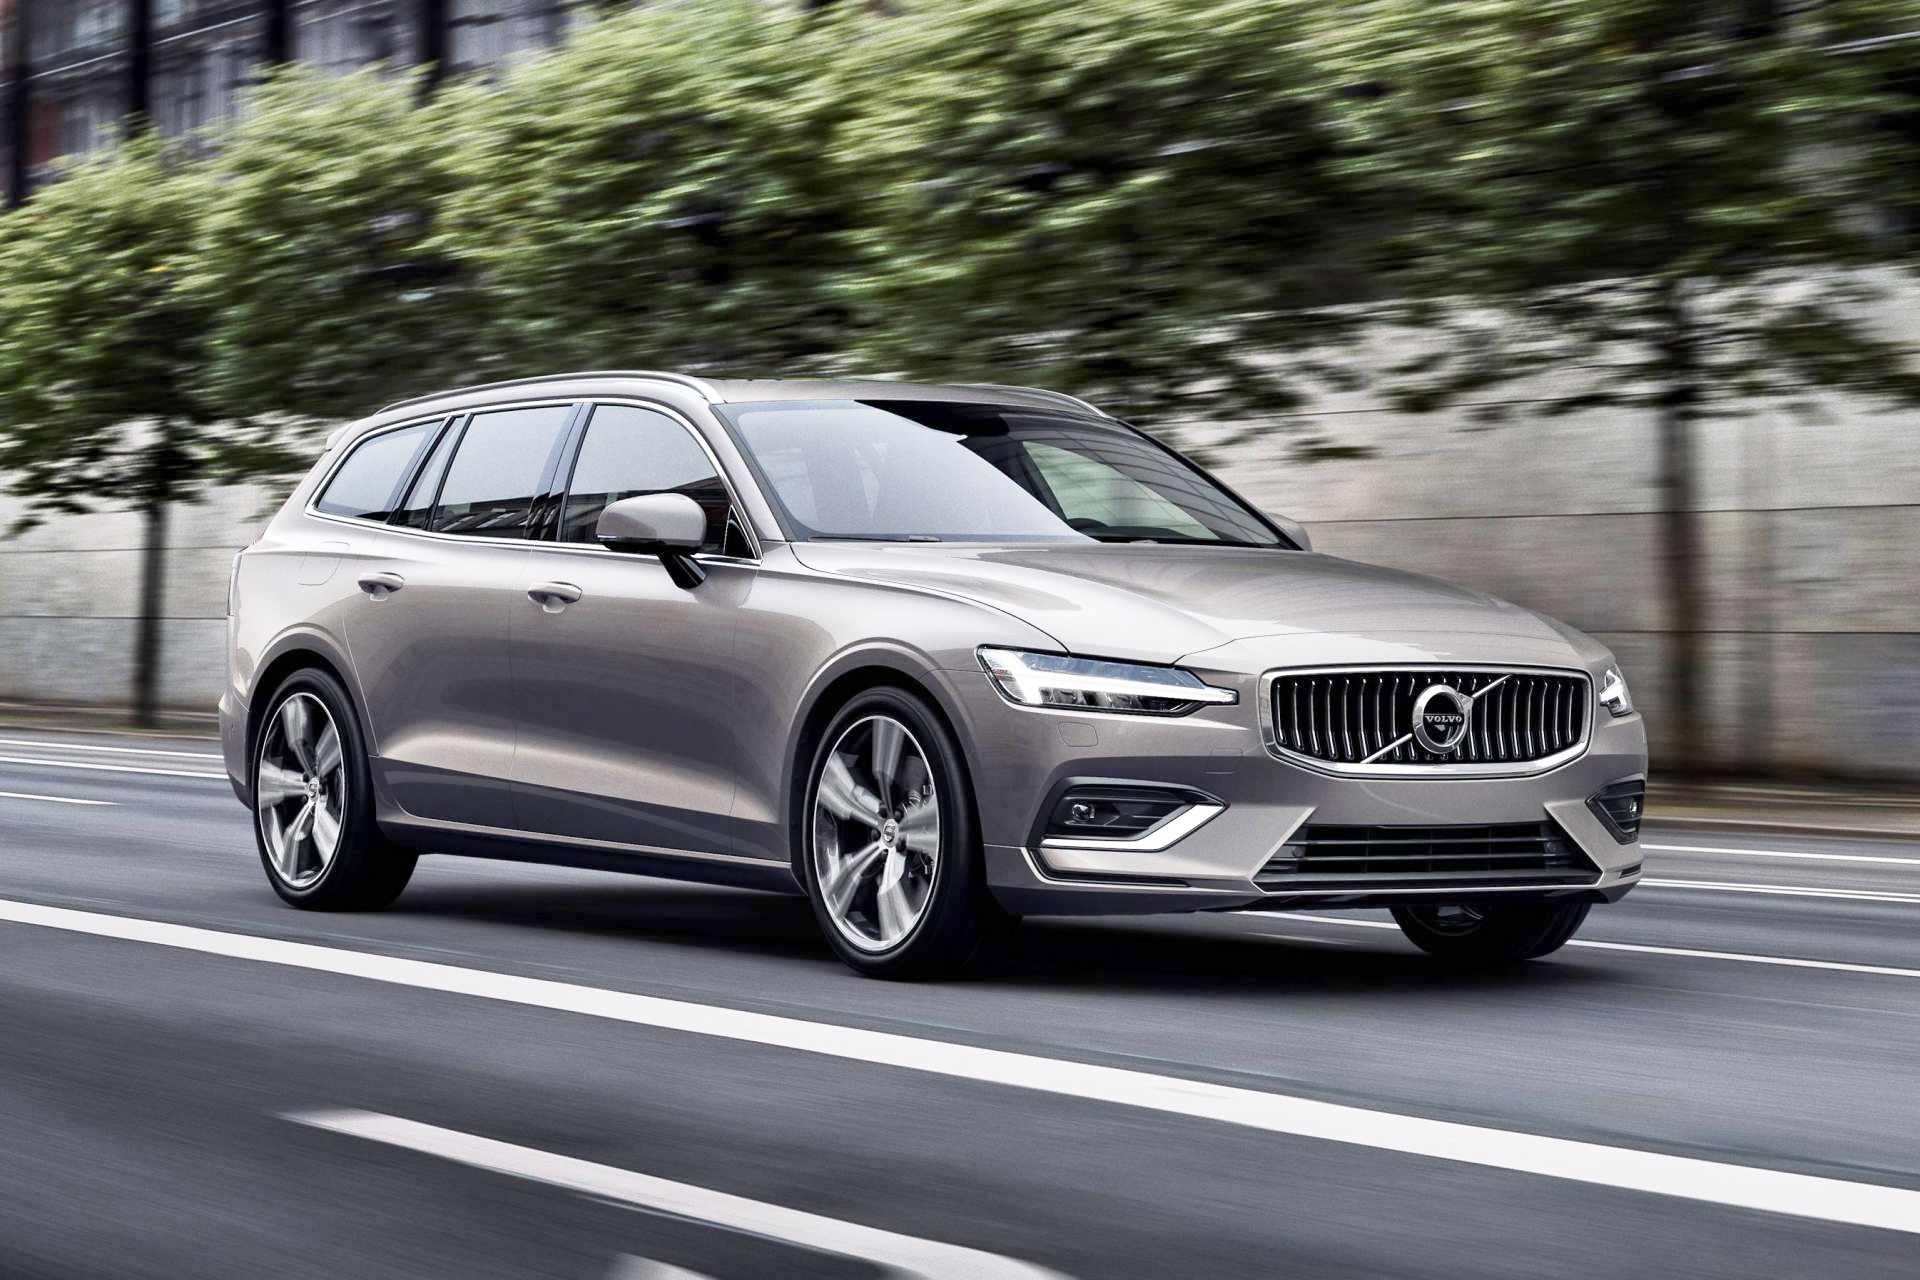 Volvo-V60-2019-lai-phe-voi-dong-co-tang-ap-2-0-L-anh-1